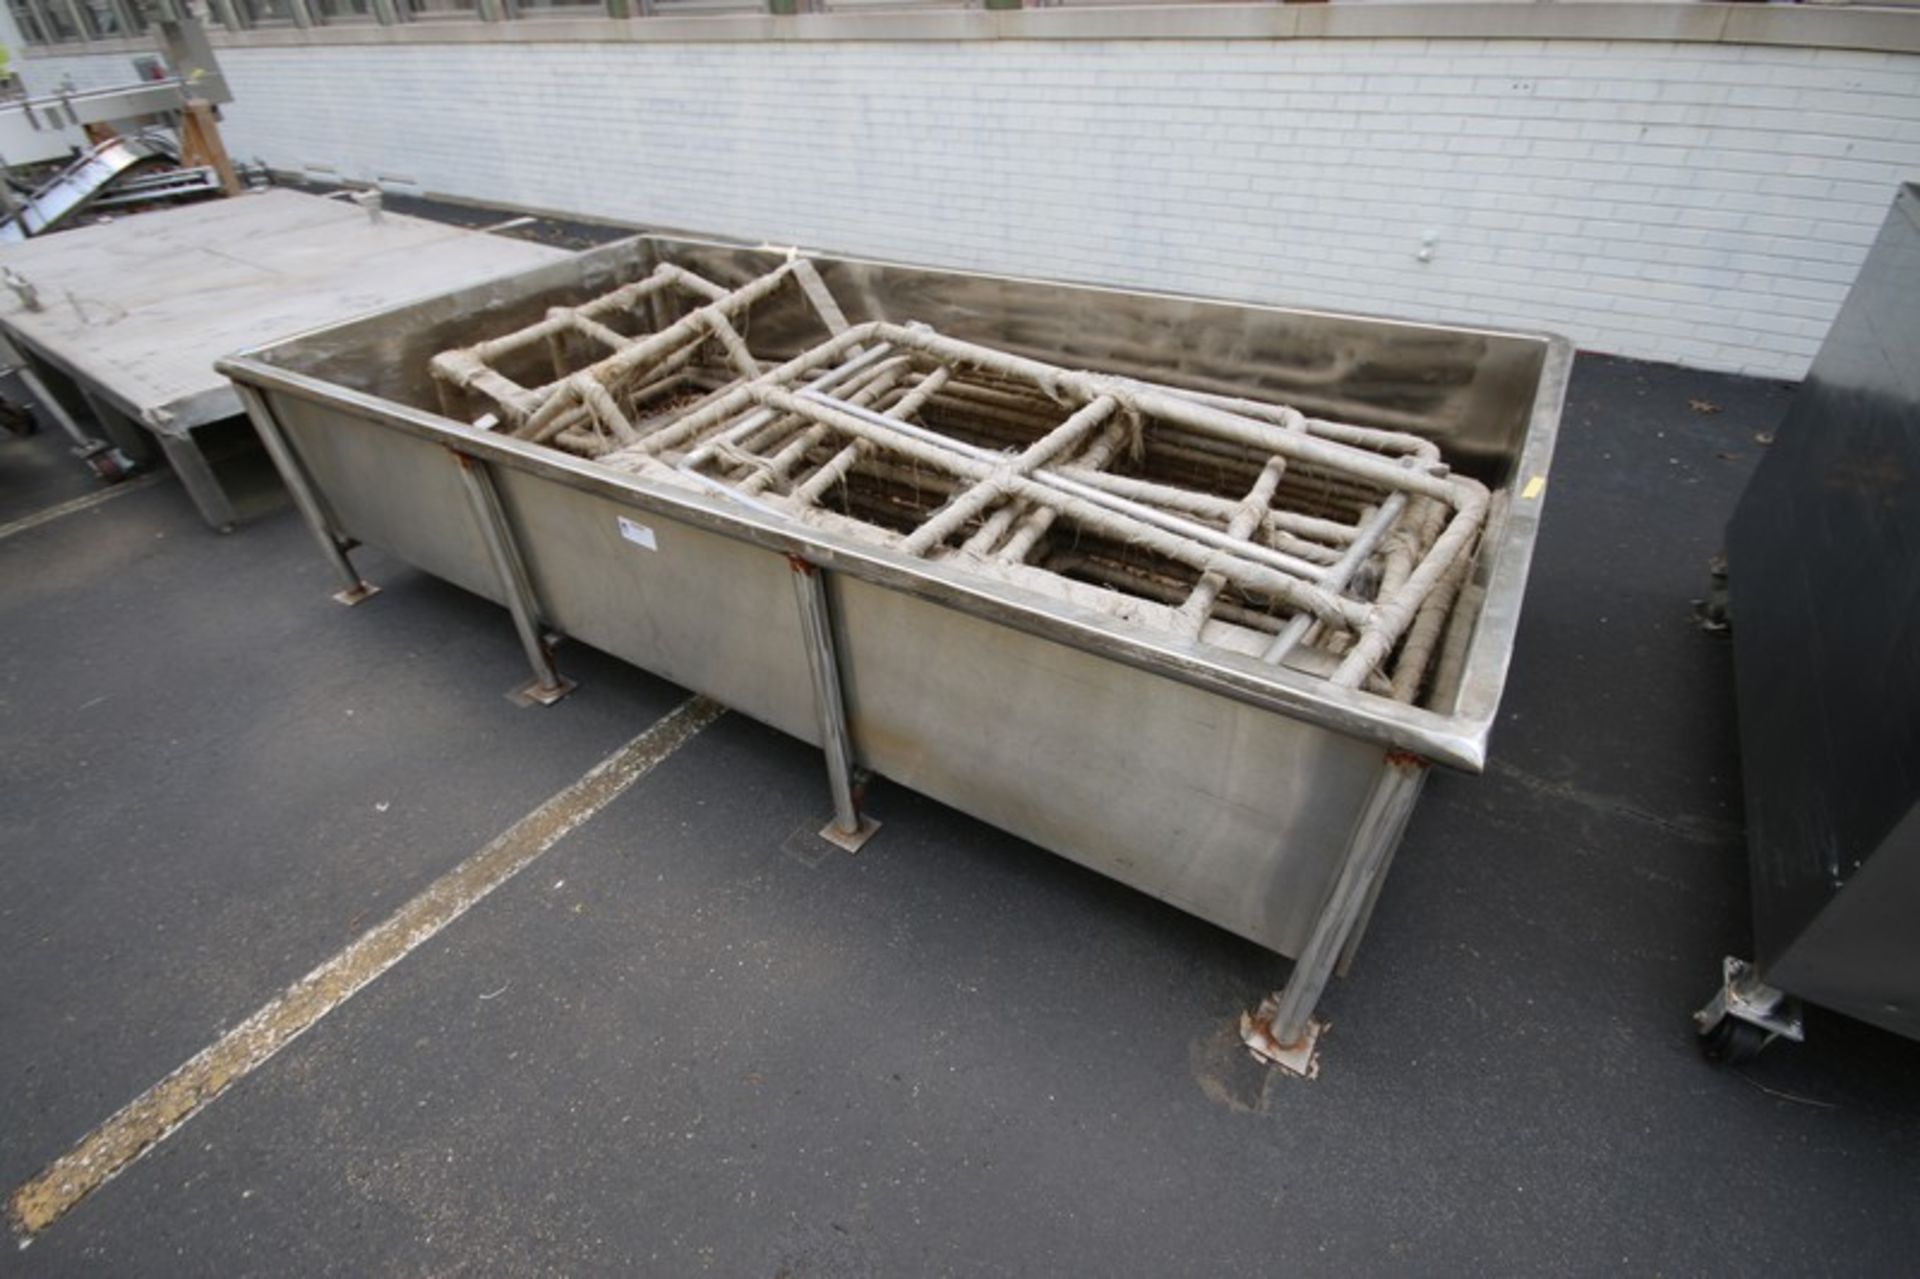 S/S Single Wall Container, with S/S Rail, OD: 10 ft. 3” L x 4 ft. 4” W x 21” Deep, Mounted on S/S - Image 2 of 3